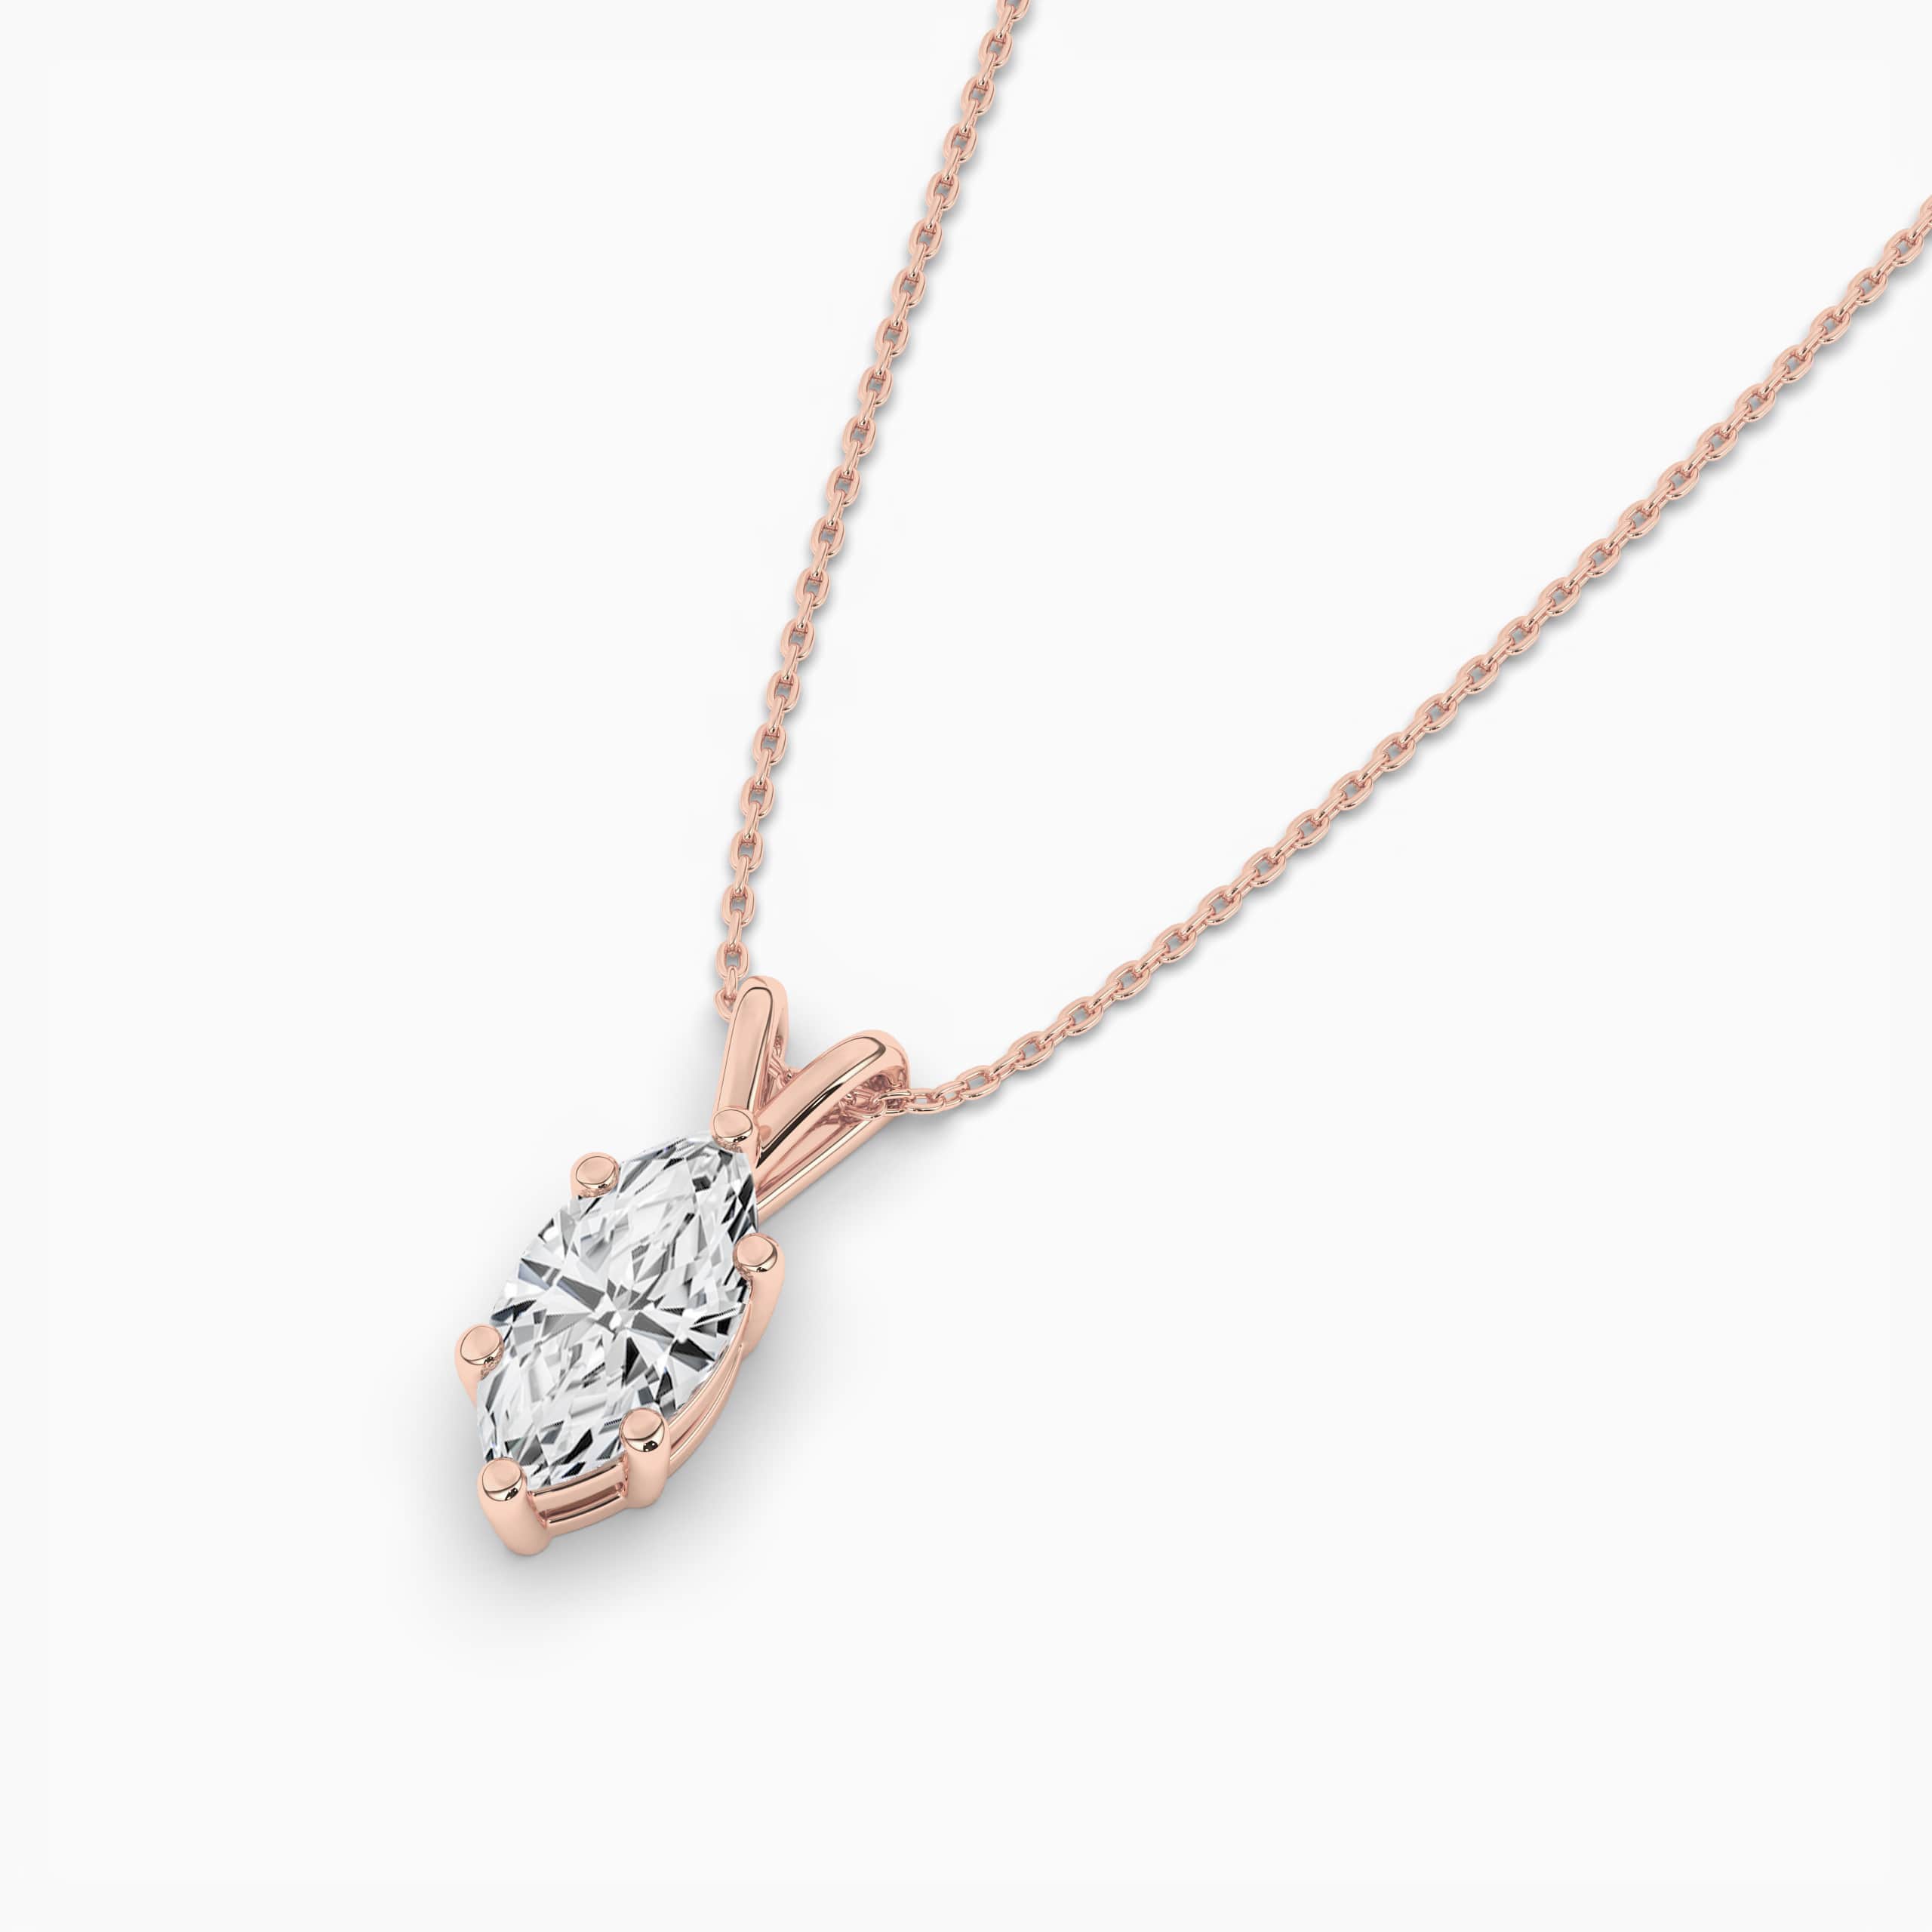 MARQUISE CUT DIAMOND NECKLACE WHITE & ROSE GOLD